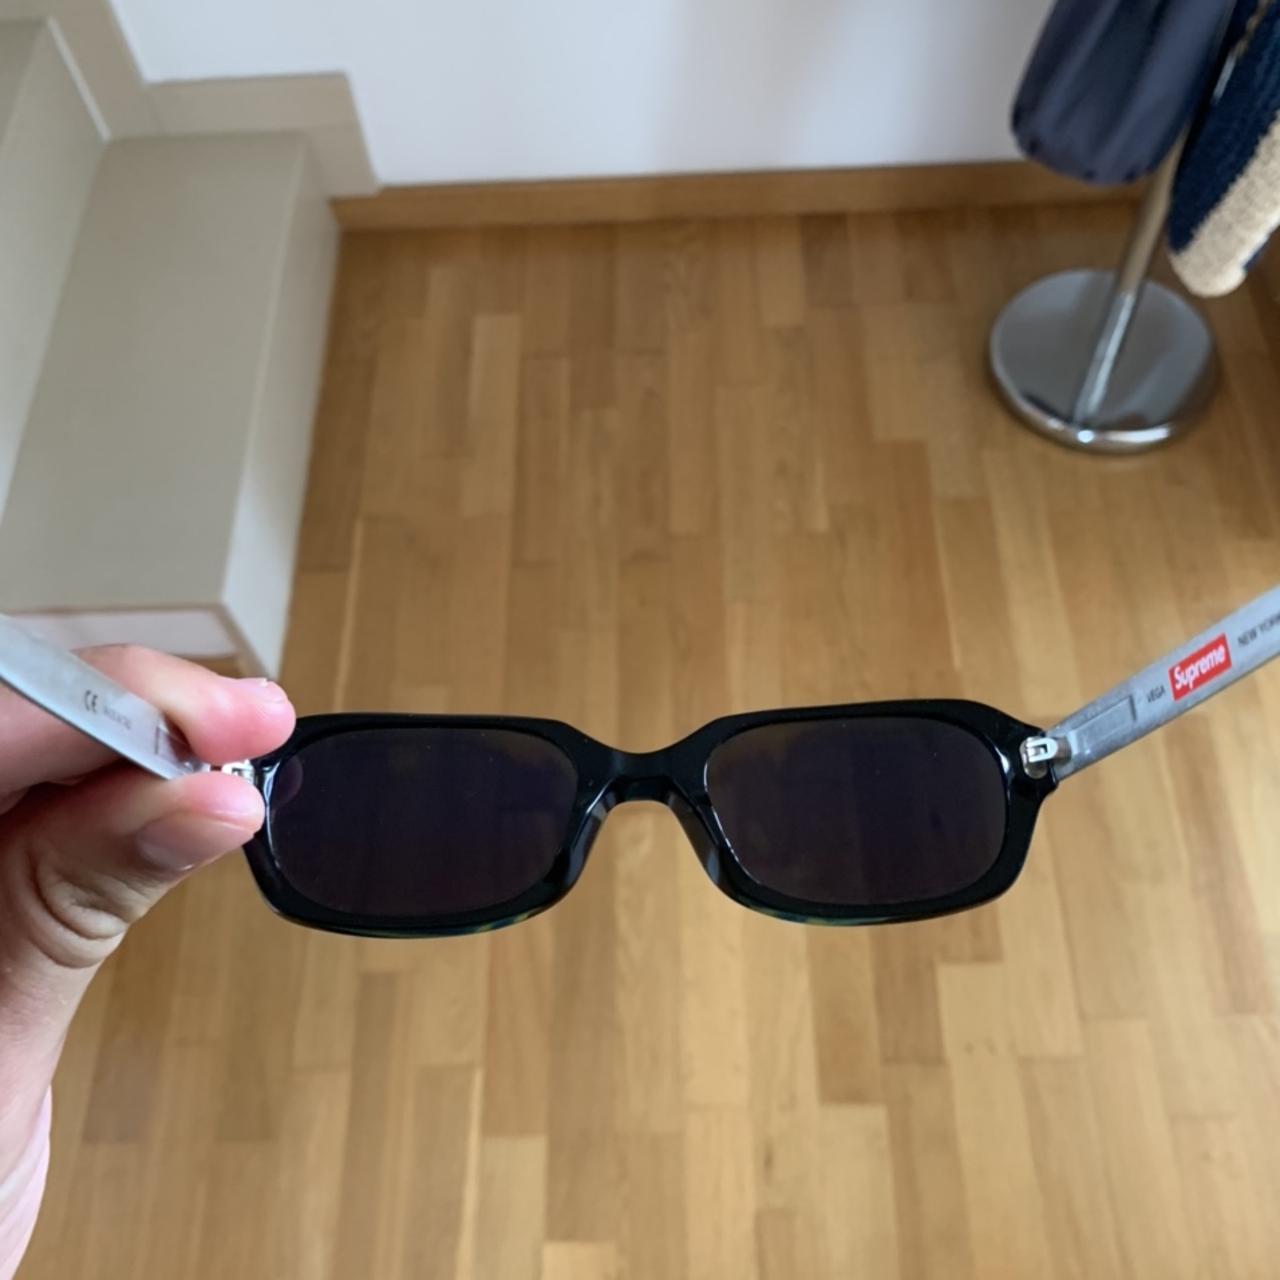 Selling these supreme vega sunglasses from summer 16...